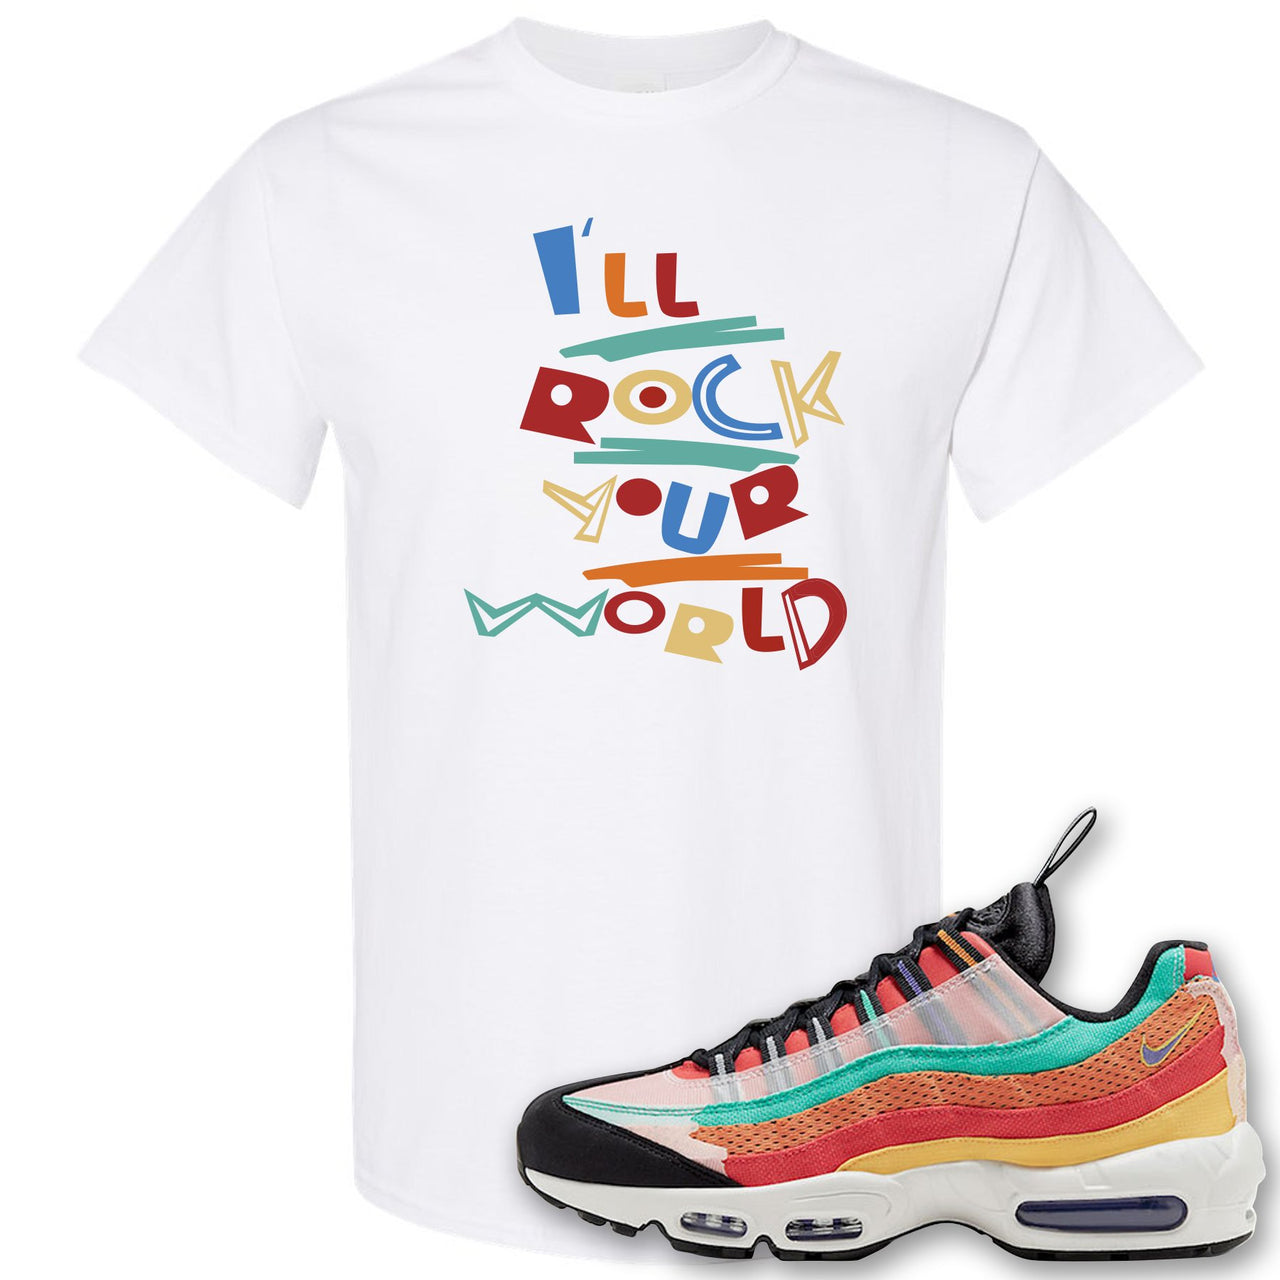 Air Max 95 Black History Month Sneaker White T Shirt | Tees to match Nike Air Max 95 Black History Month Shoes | I'll Rock Your World